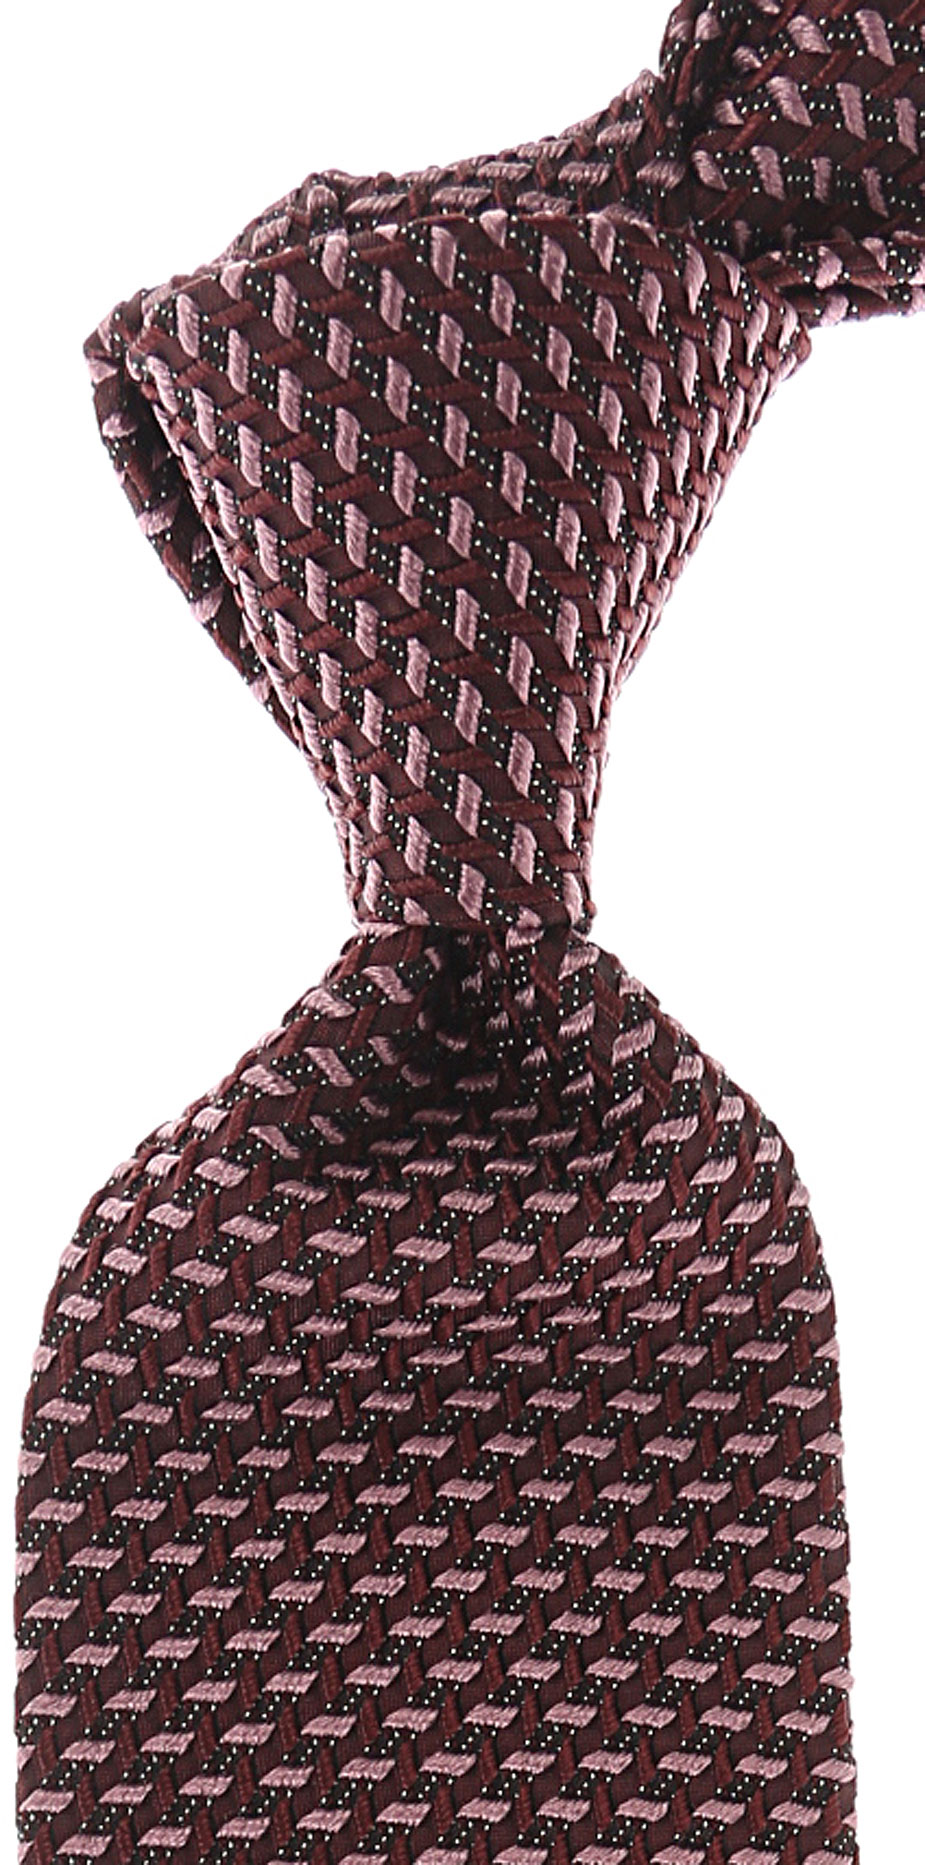 Ties Tom Ford, Style code: 217196--